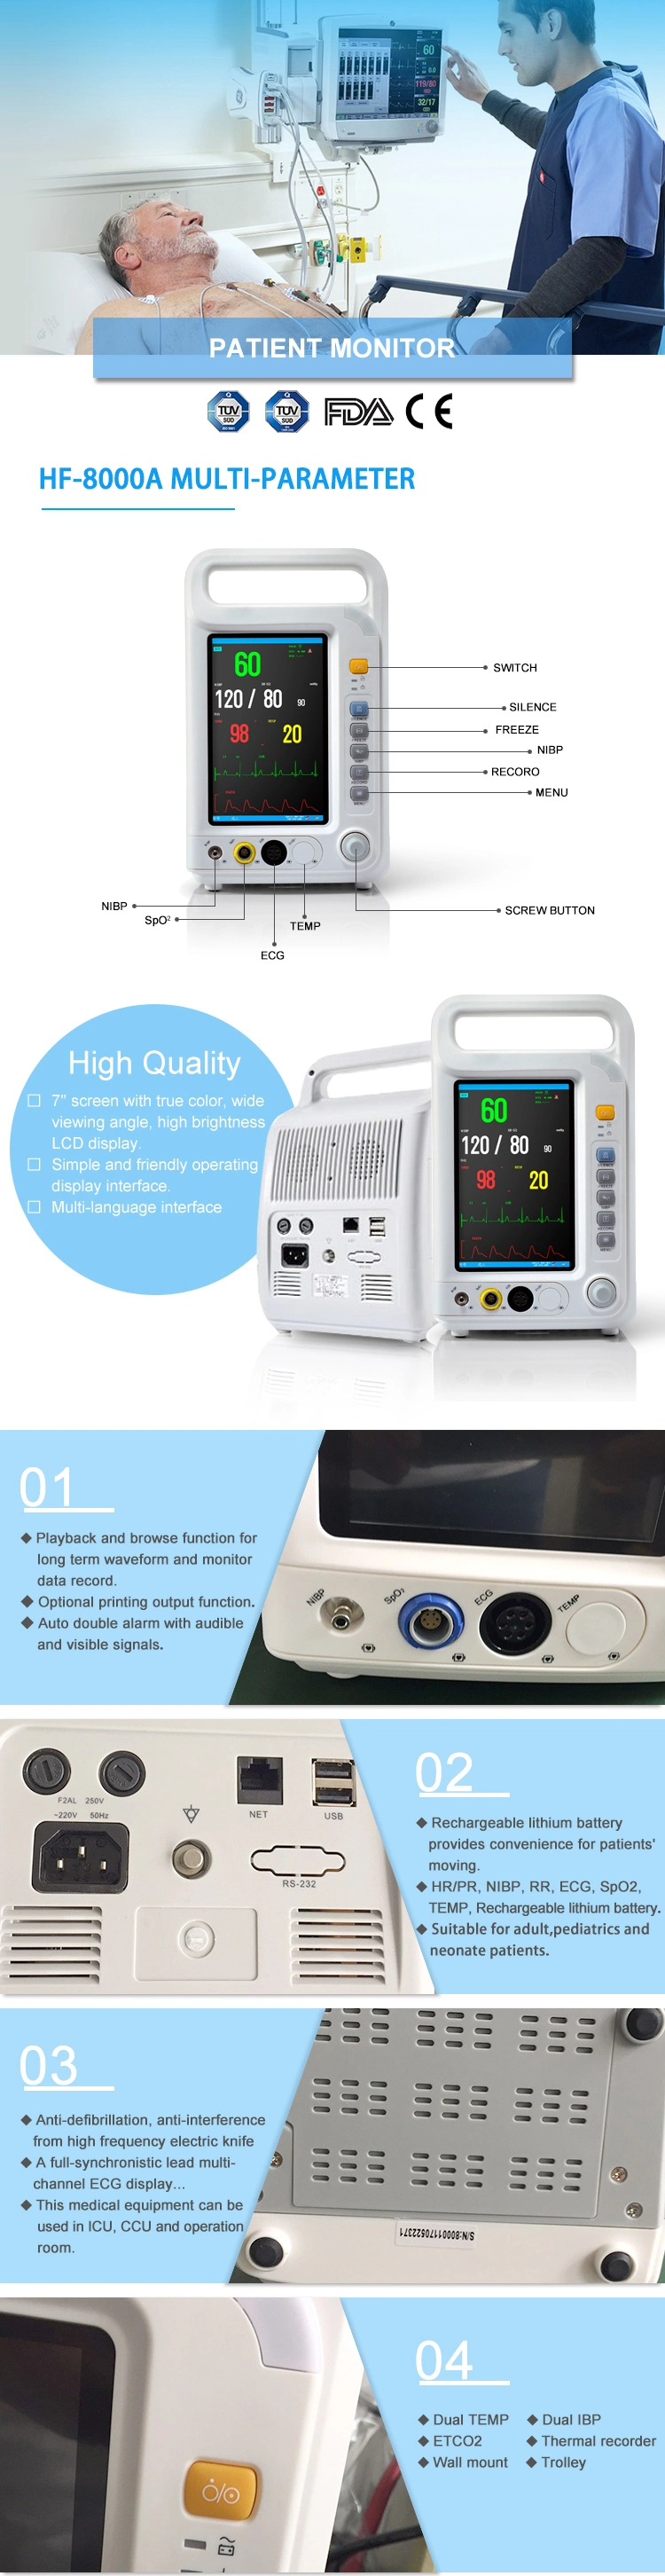 Portable Multi Parameter Professional Patient Monitor with ECG, NIBP, SpO2, Resp Function (HF-8000A)